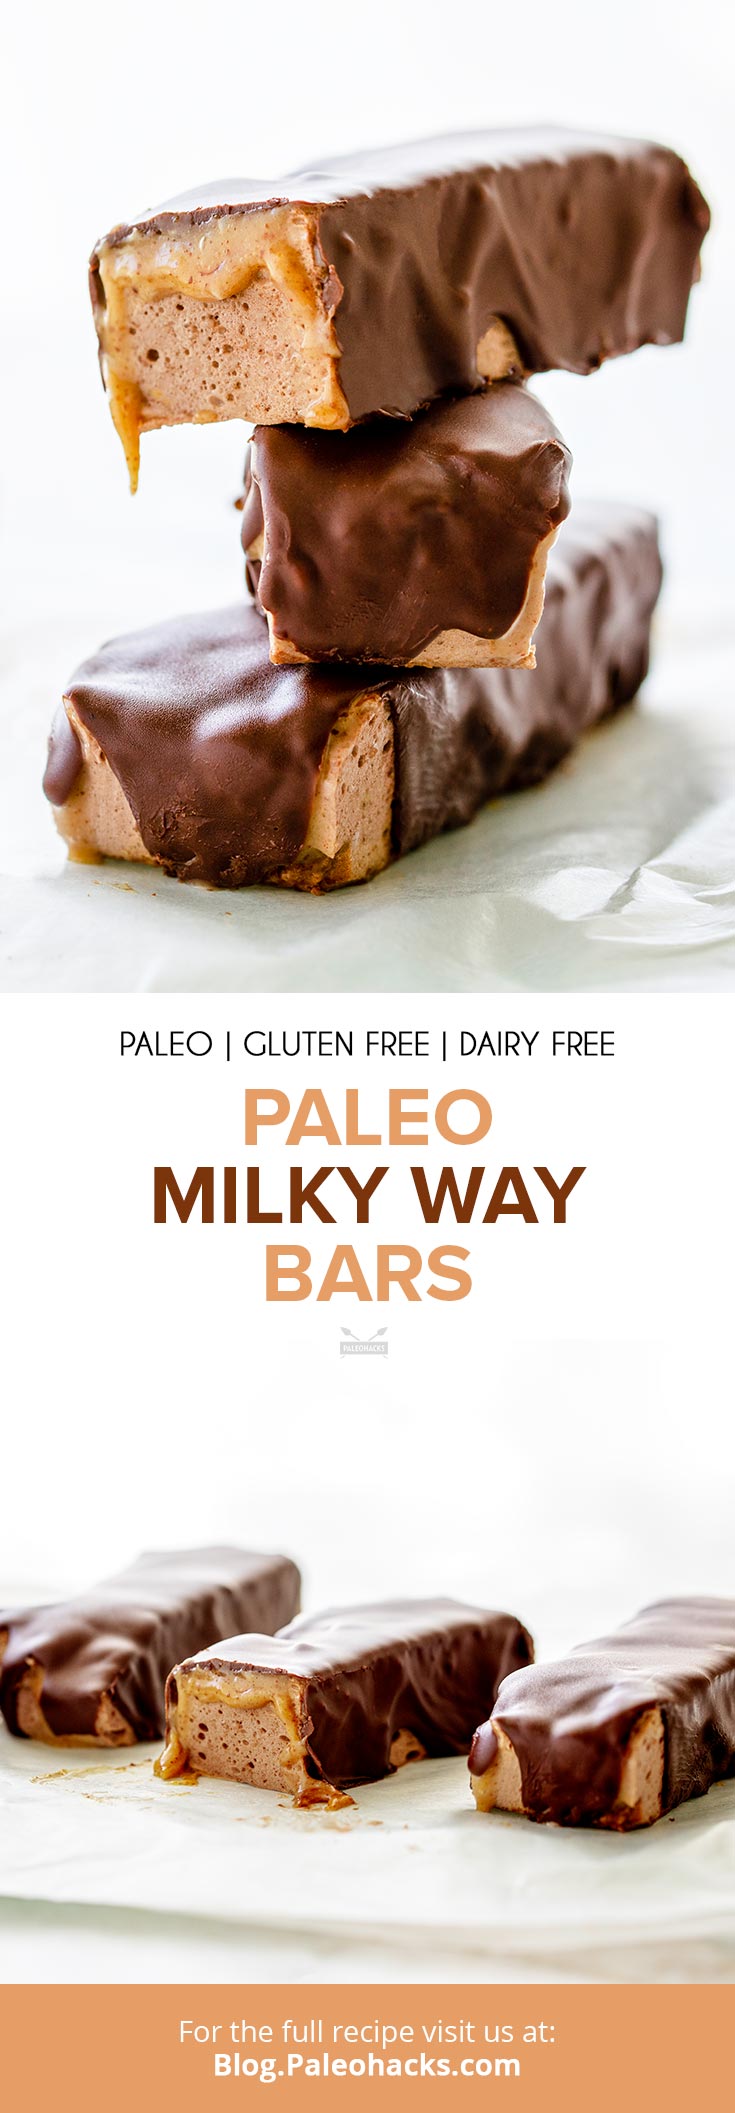 Who doesn't love a good candy bar? These Paleo Milky Way bars are especially delicious thanks to their soft marshmallow insides and gooey caramel.